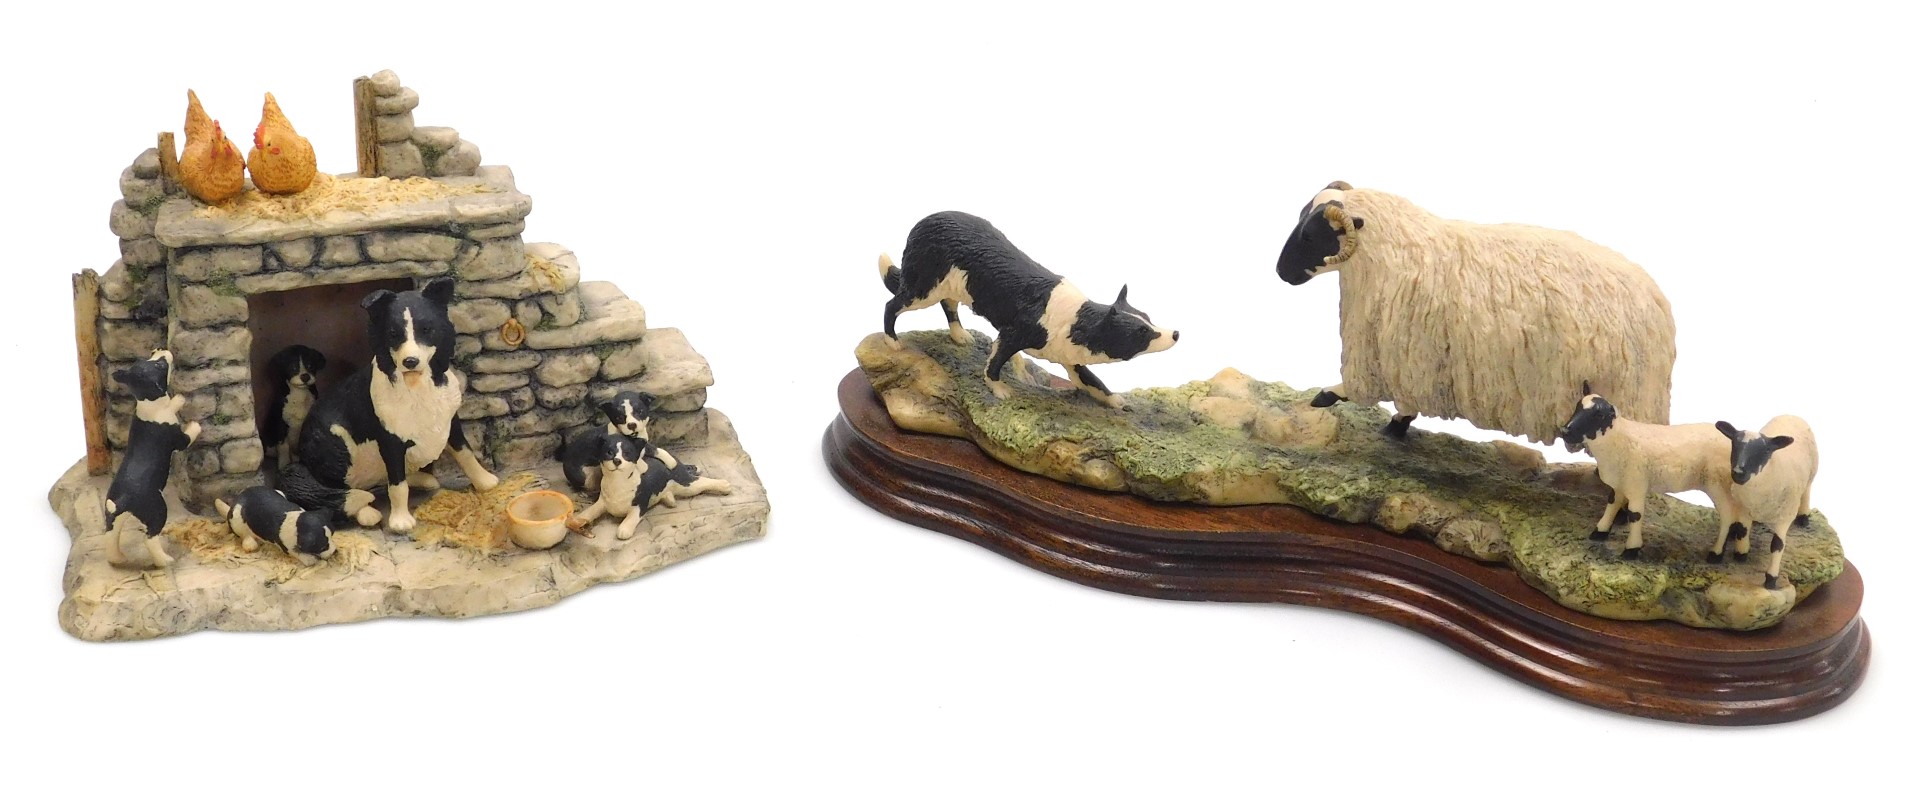 A Border Fine Arts sculpture of a sheep dog and sheep, designed by Ayres, raised on a wooden base, 2